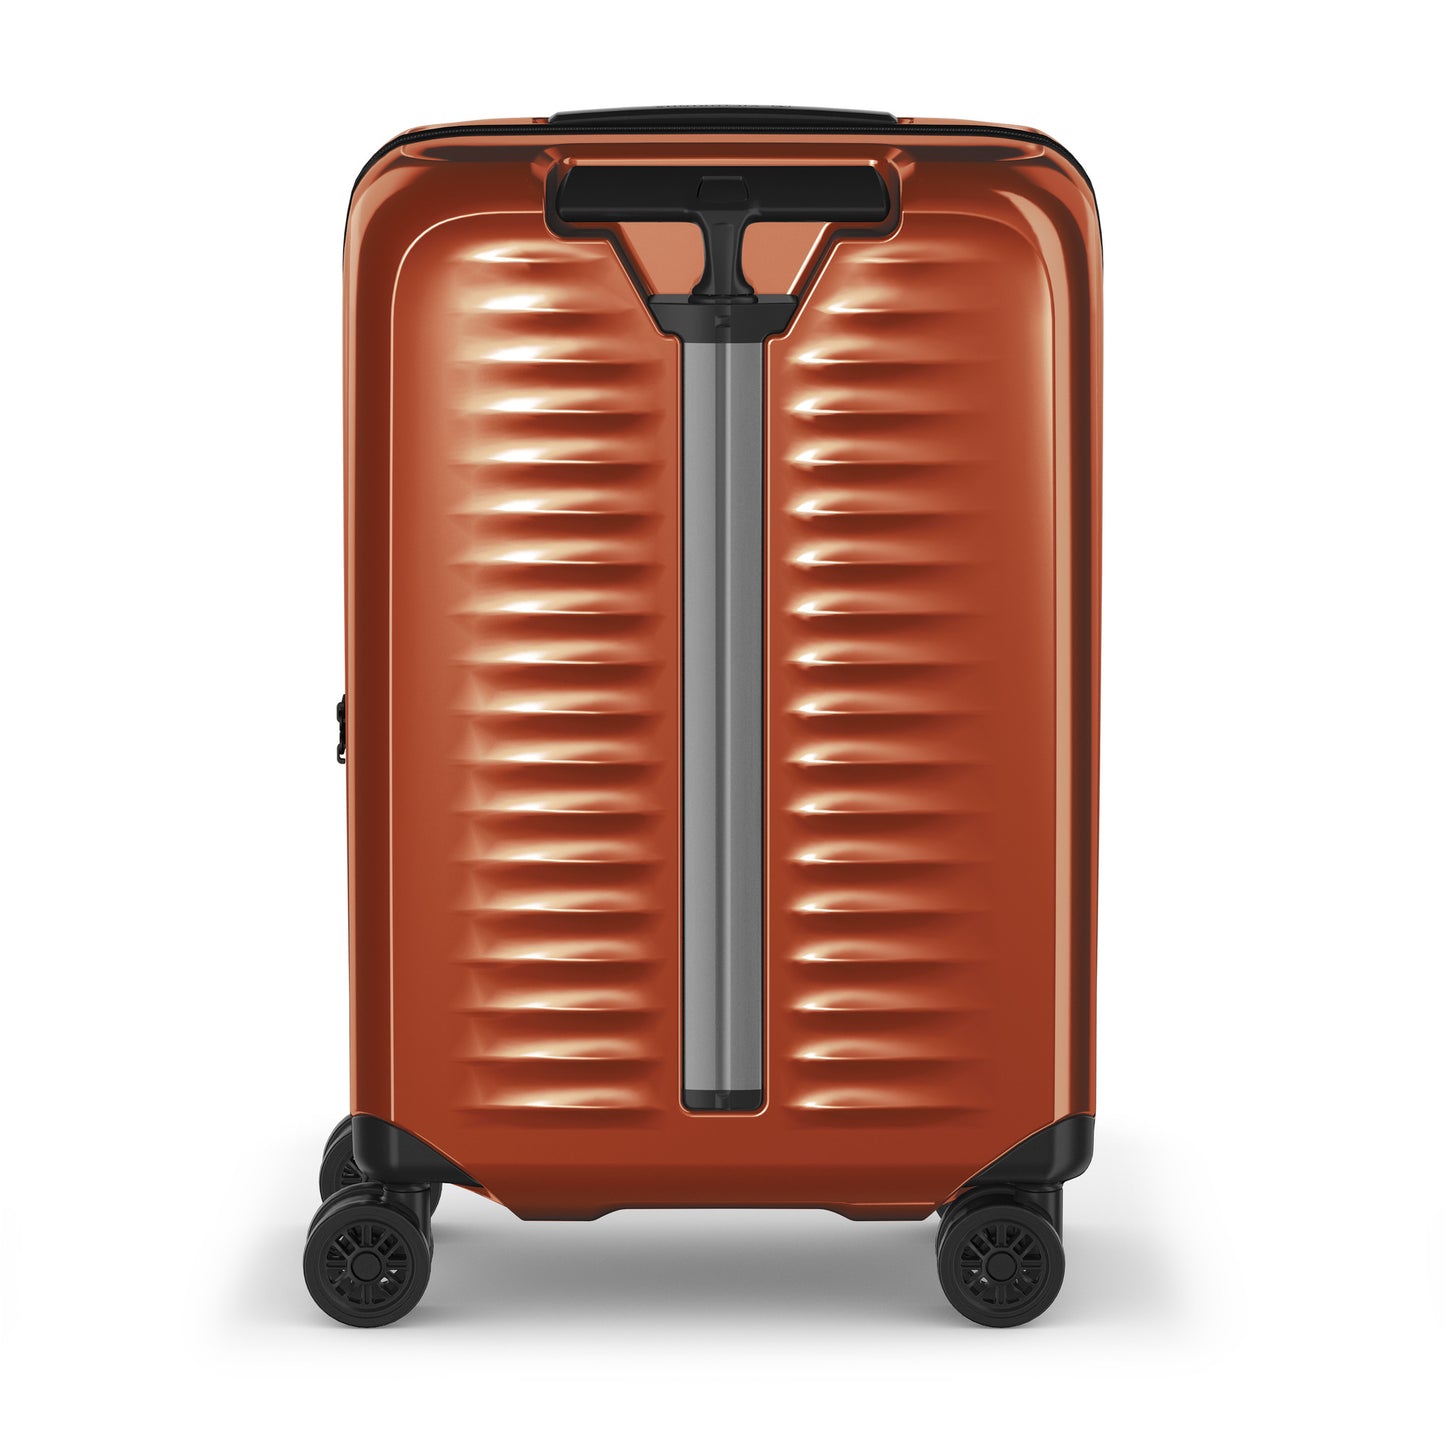 On Sale - Victorinox Airox Frequent Flyer Hardside Carry-On Spinner (SKU 6125)